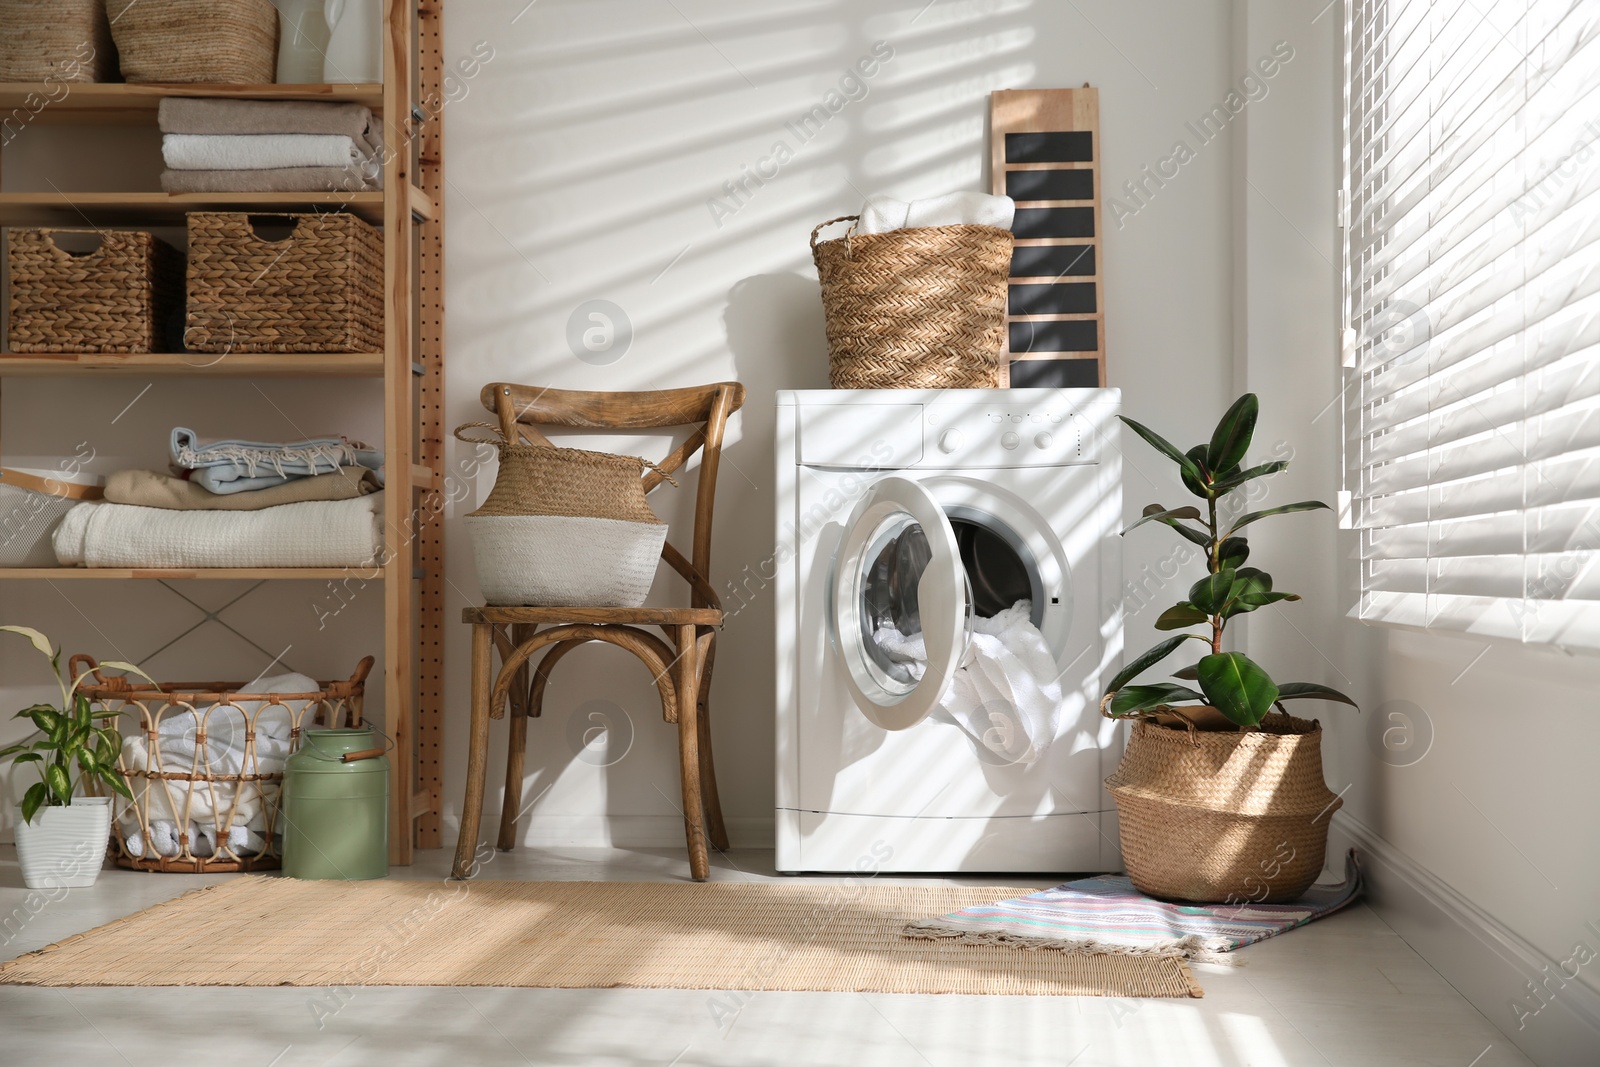 Photo of Modern washing machine and plants in laundry room interior